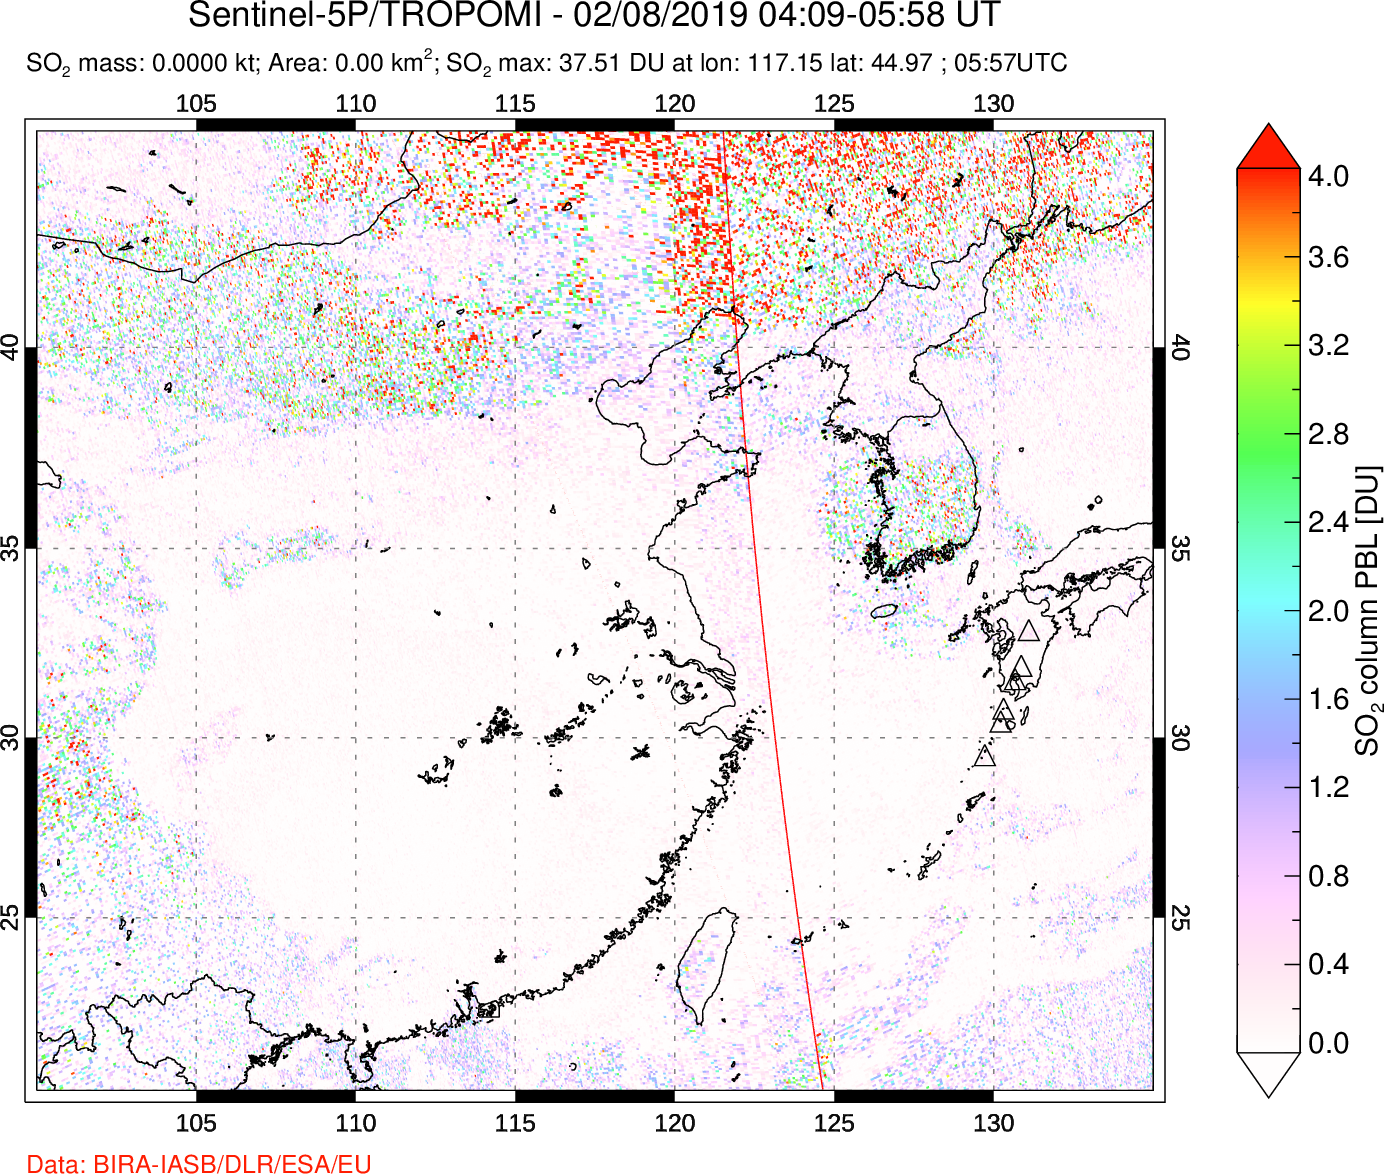 A sulfur dioxide image over Eastern China on Feb 08, 2019.